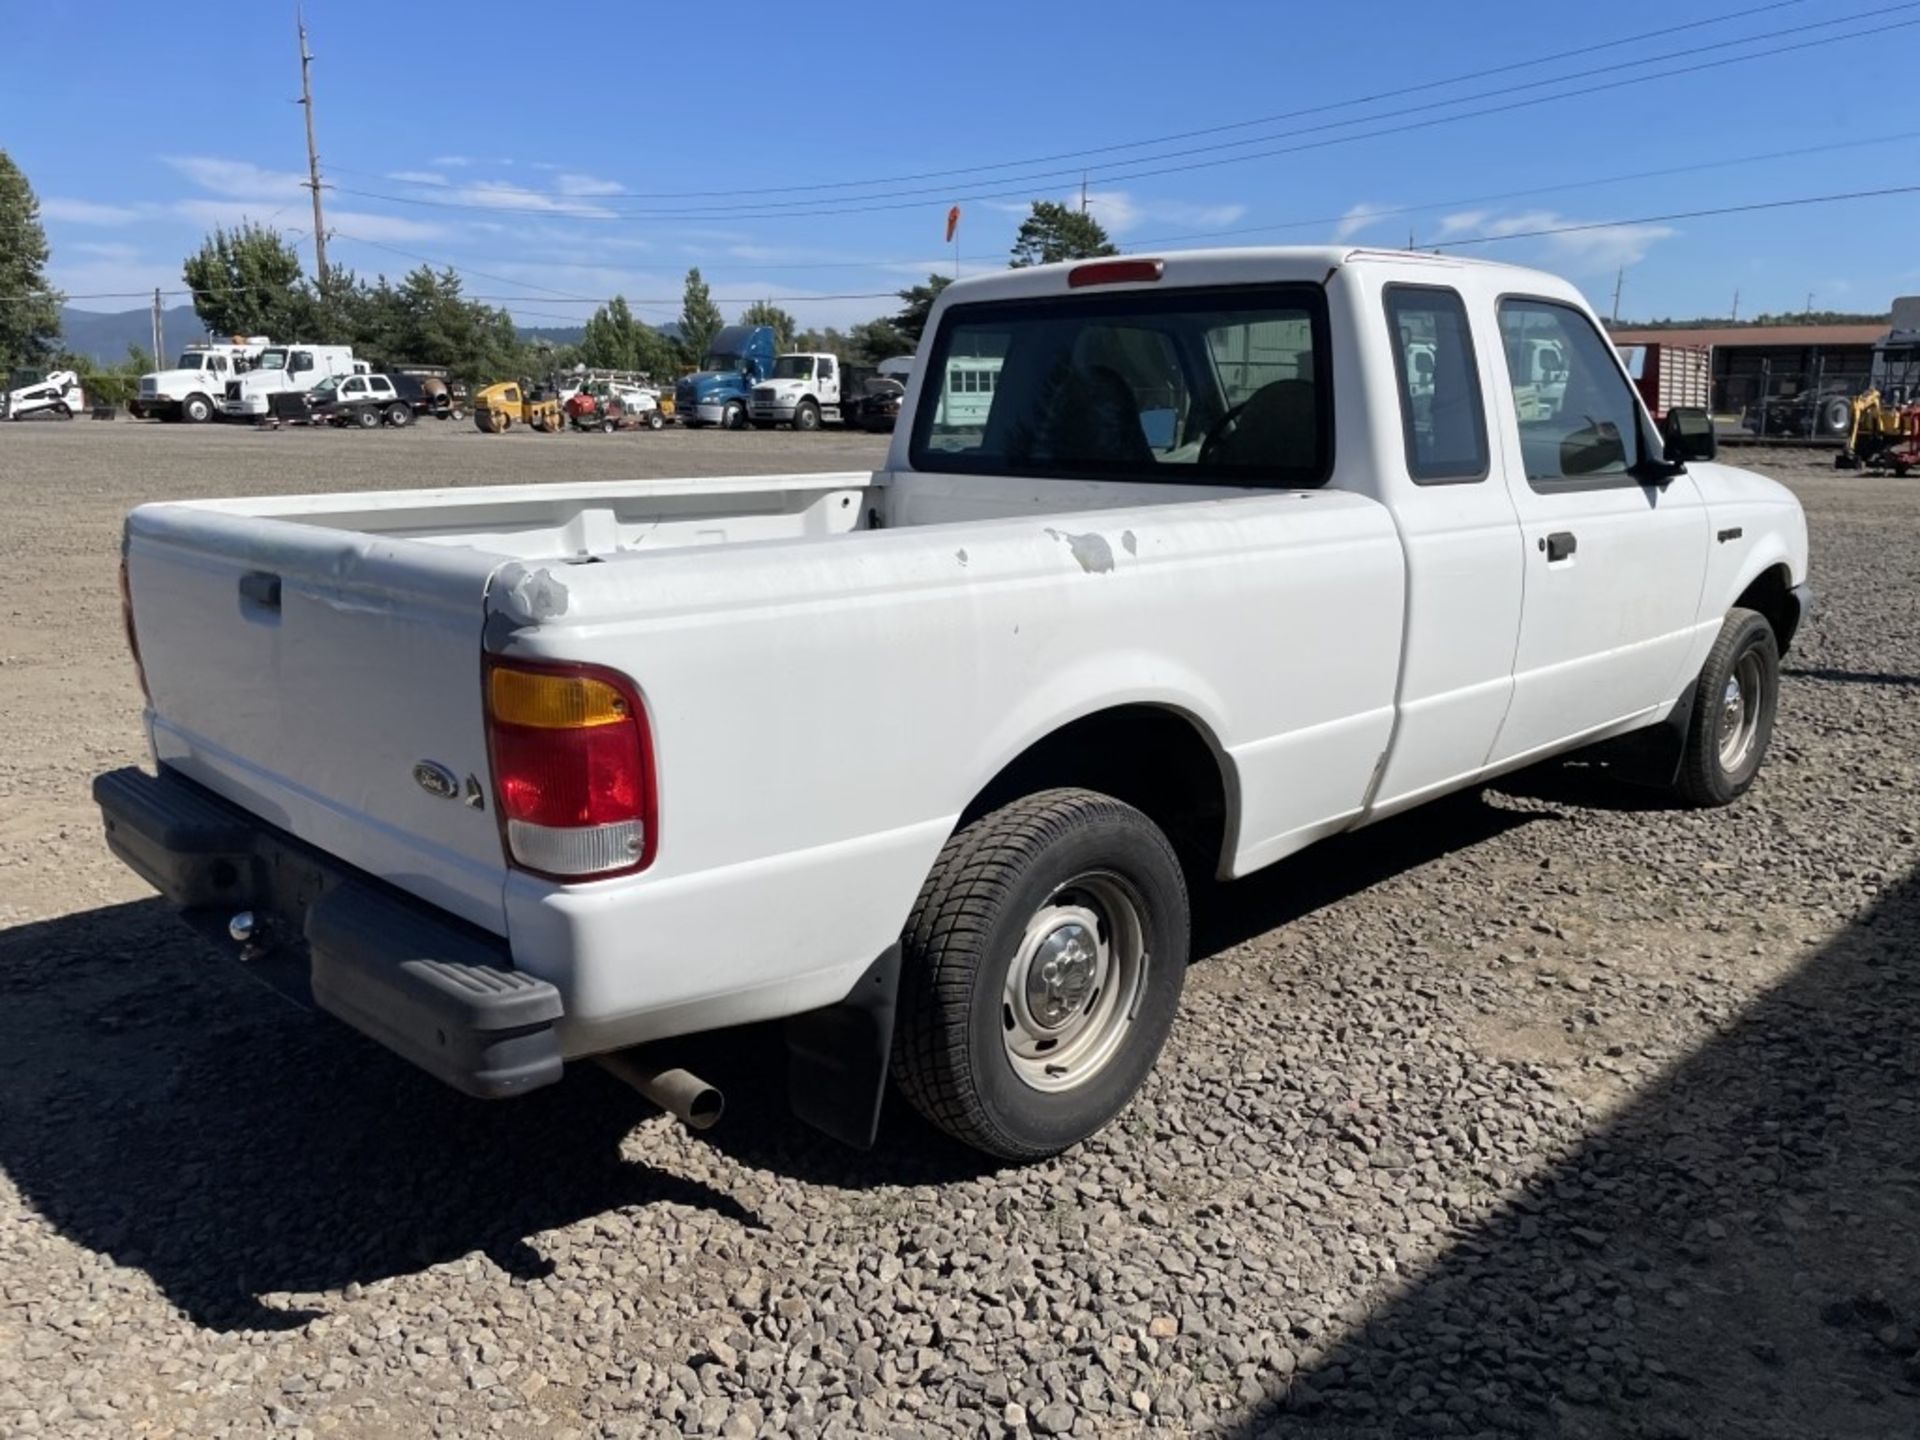 1999 Ford Ranger Extra Cab Pickup - Image 3 of 12